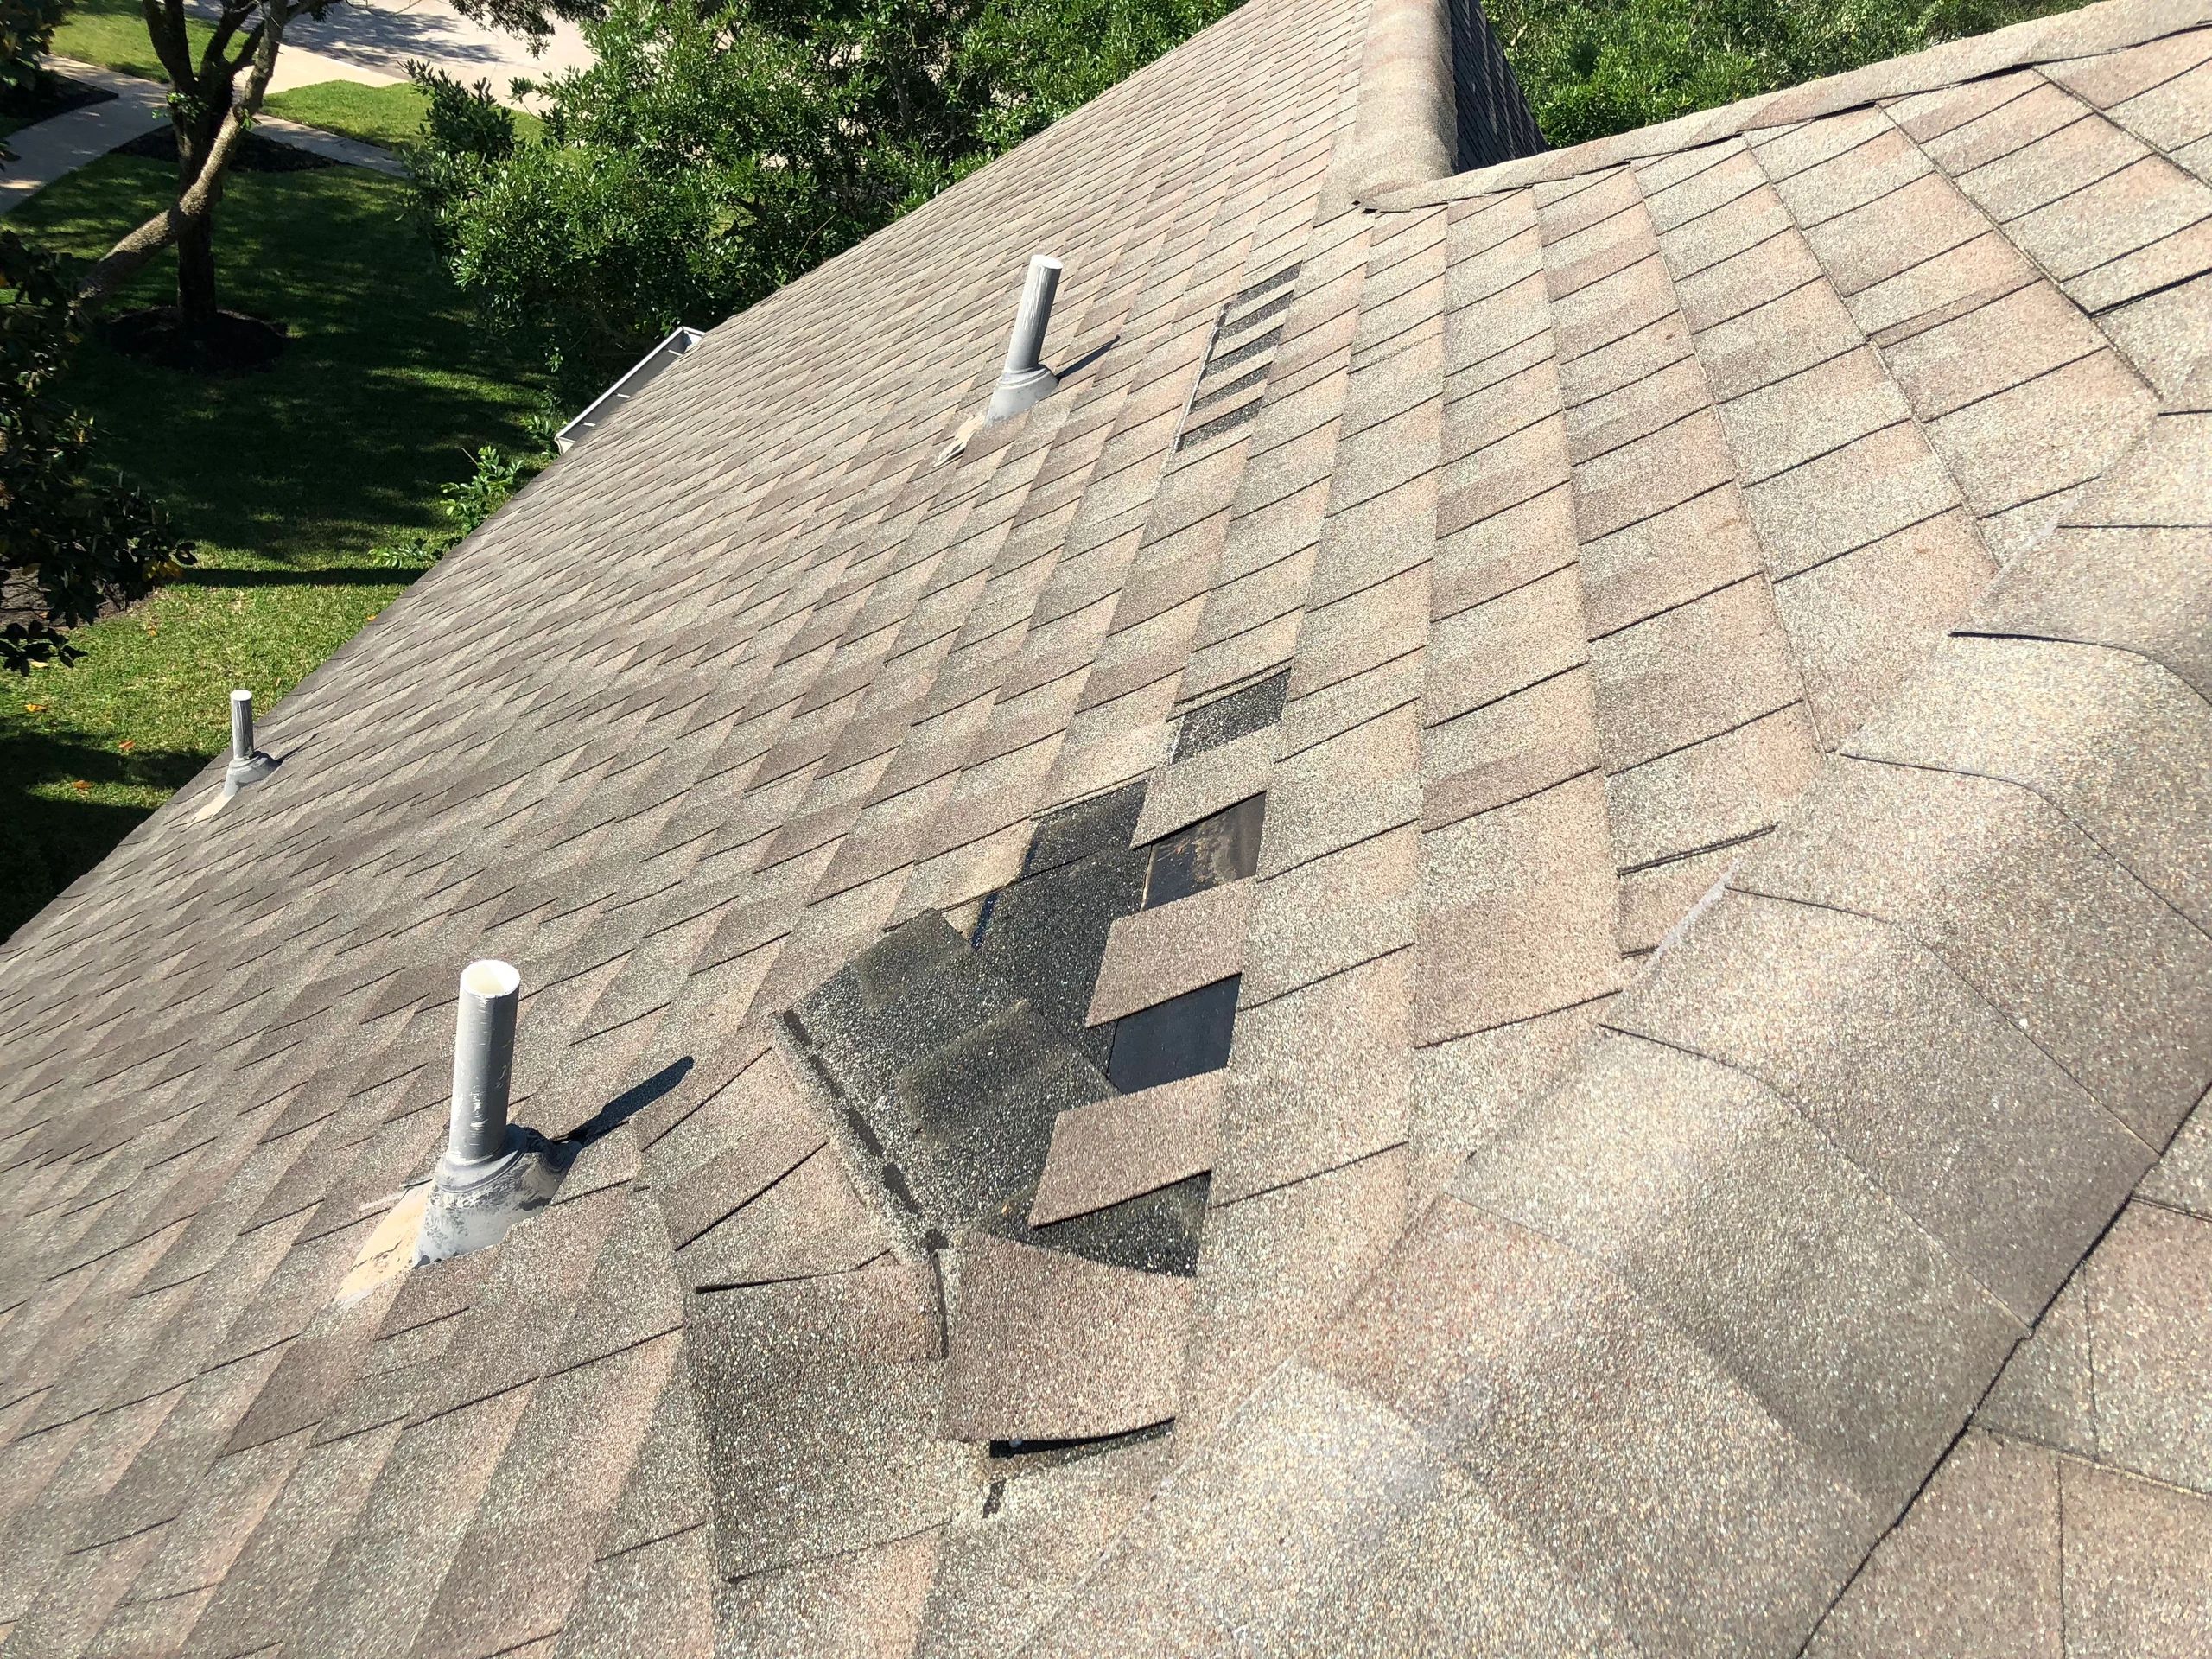 Wind damaged shingles Keystone Contracting Group helps with insurance claims